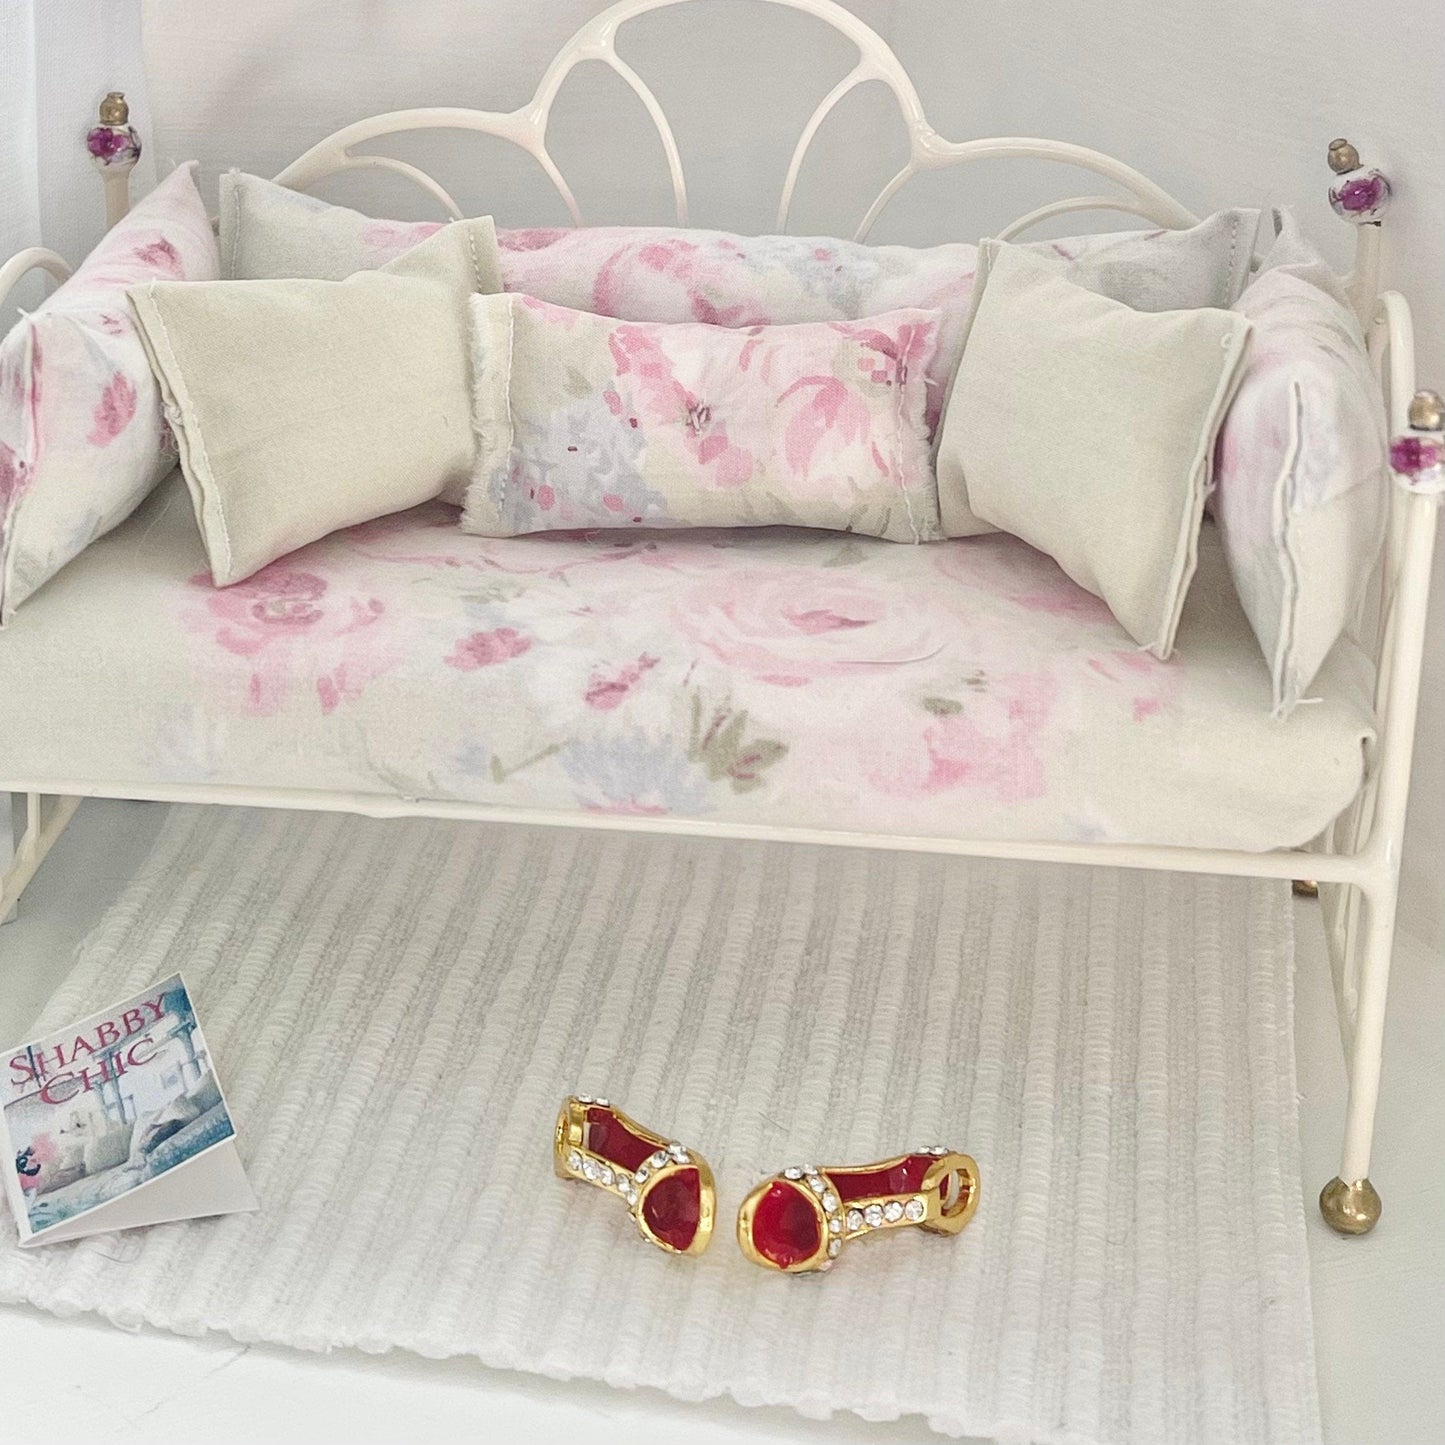 Chantallena Doll House Day Bed- Seven Piece Shabby Cotton Faded Green and Pink Roses Set with Mattress | Faded Shabby Green